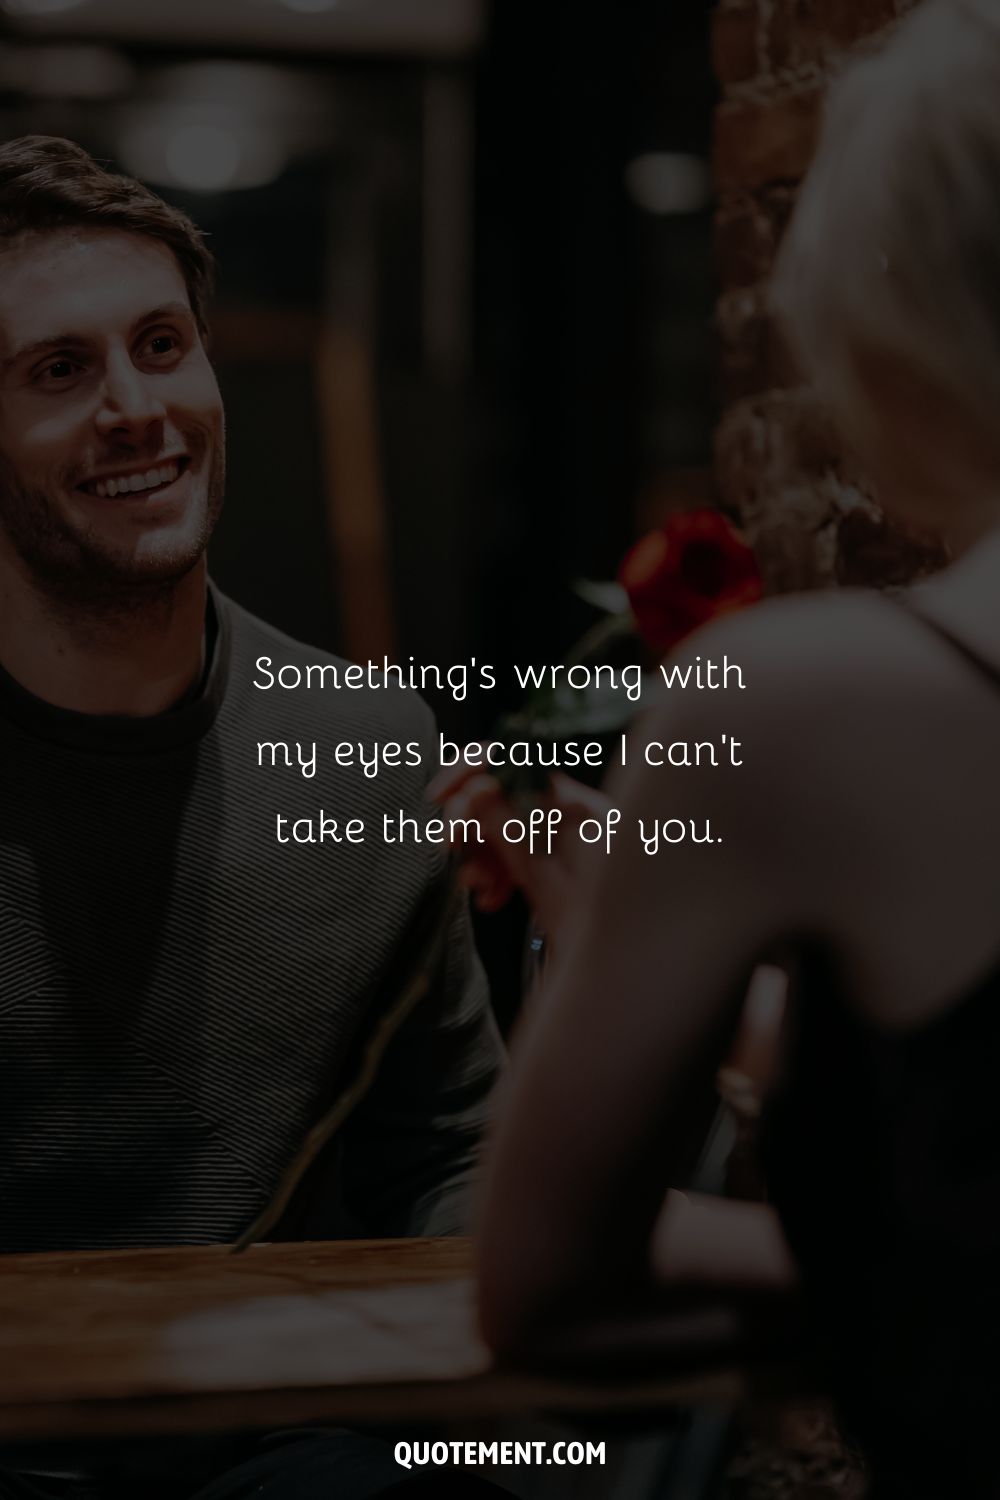 Something’s wrong with my eyes because I can’t take them off of you.